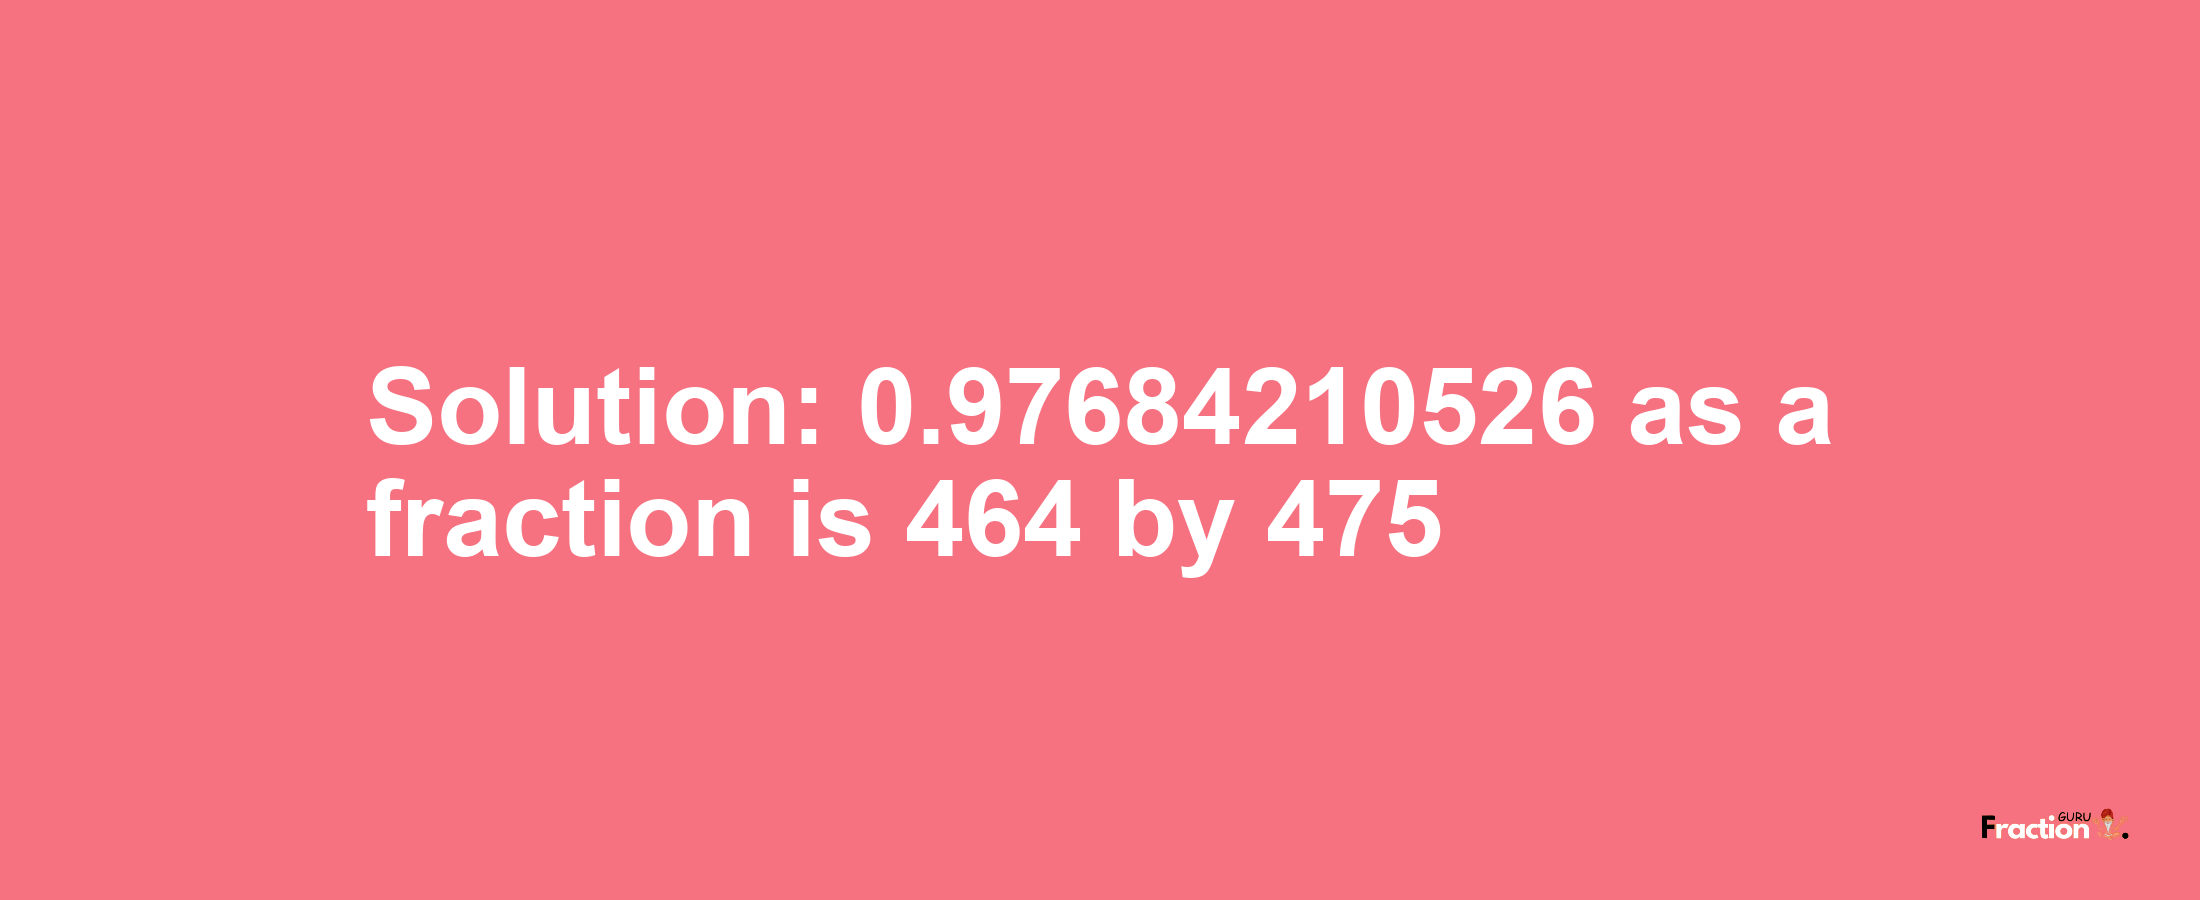 Solution:0.97684210526 as a fraction is 464/475